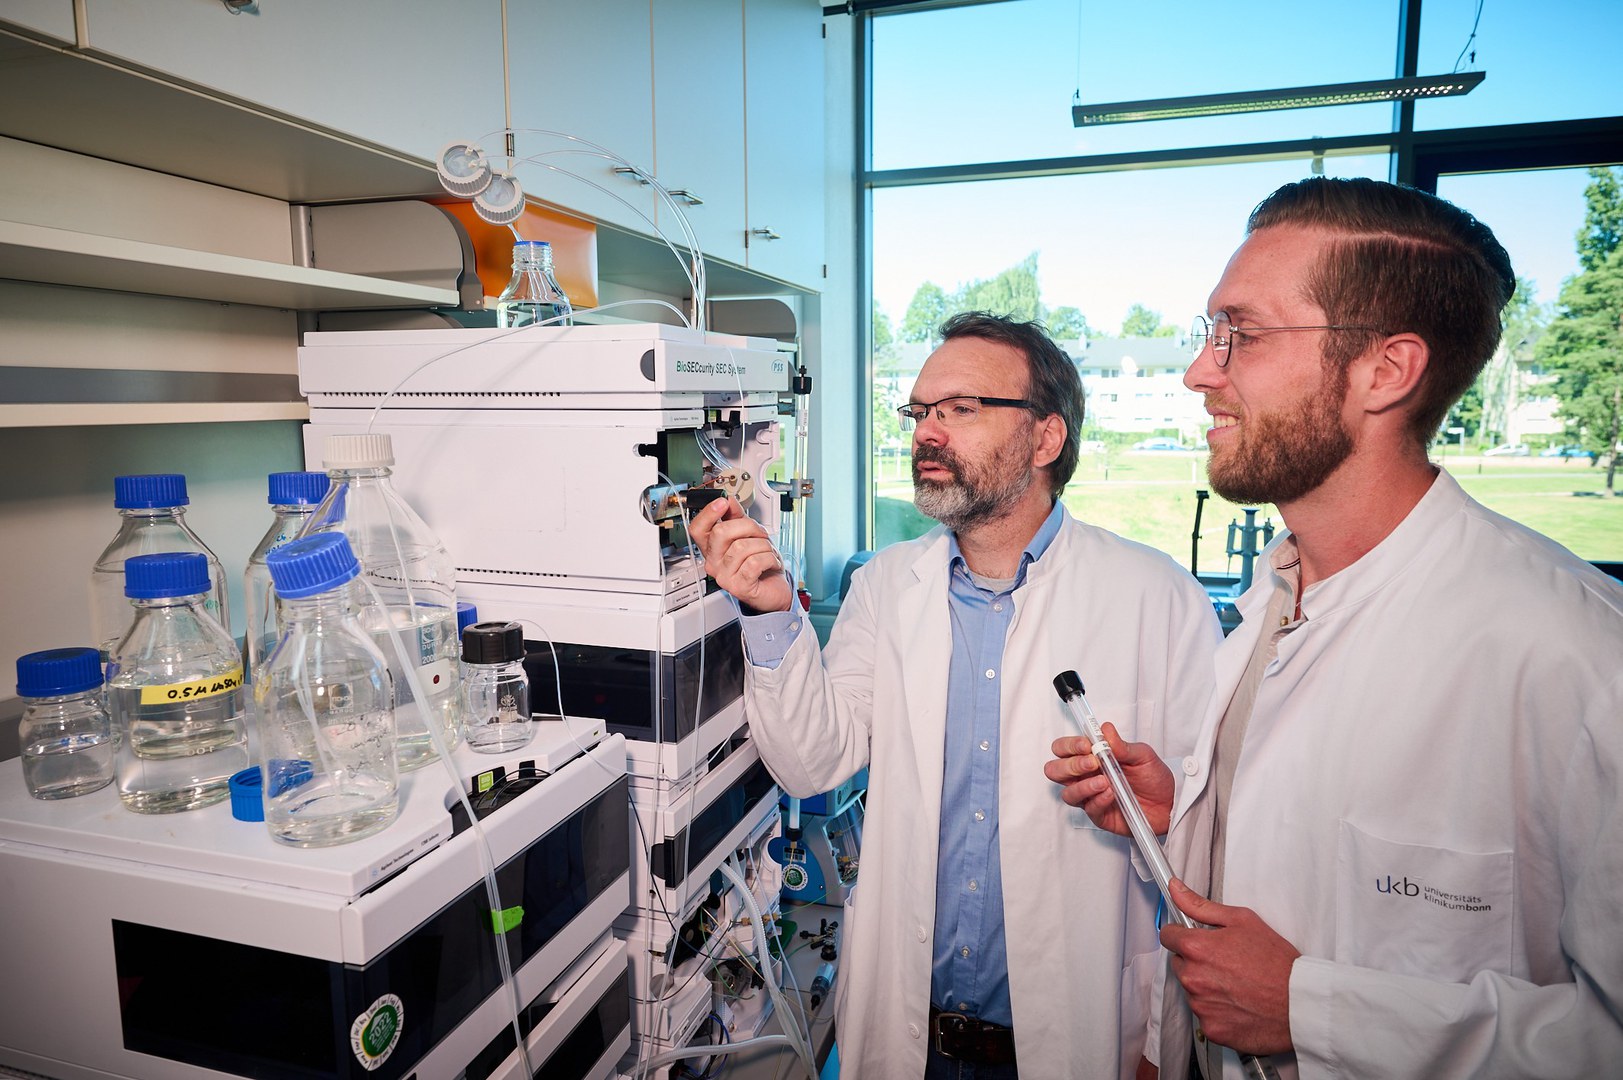 (from left) PD Dr. Gregor Hagelueken and Dr. Martin Peter are on the trail of a bacterial freight elevator in the laboratory that helps pathogens hide from our immune system.